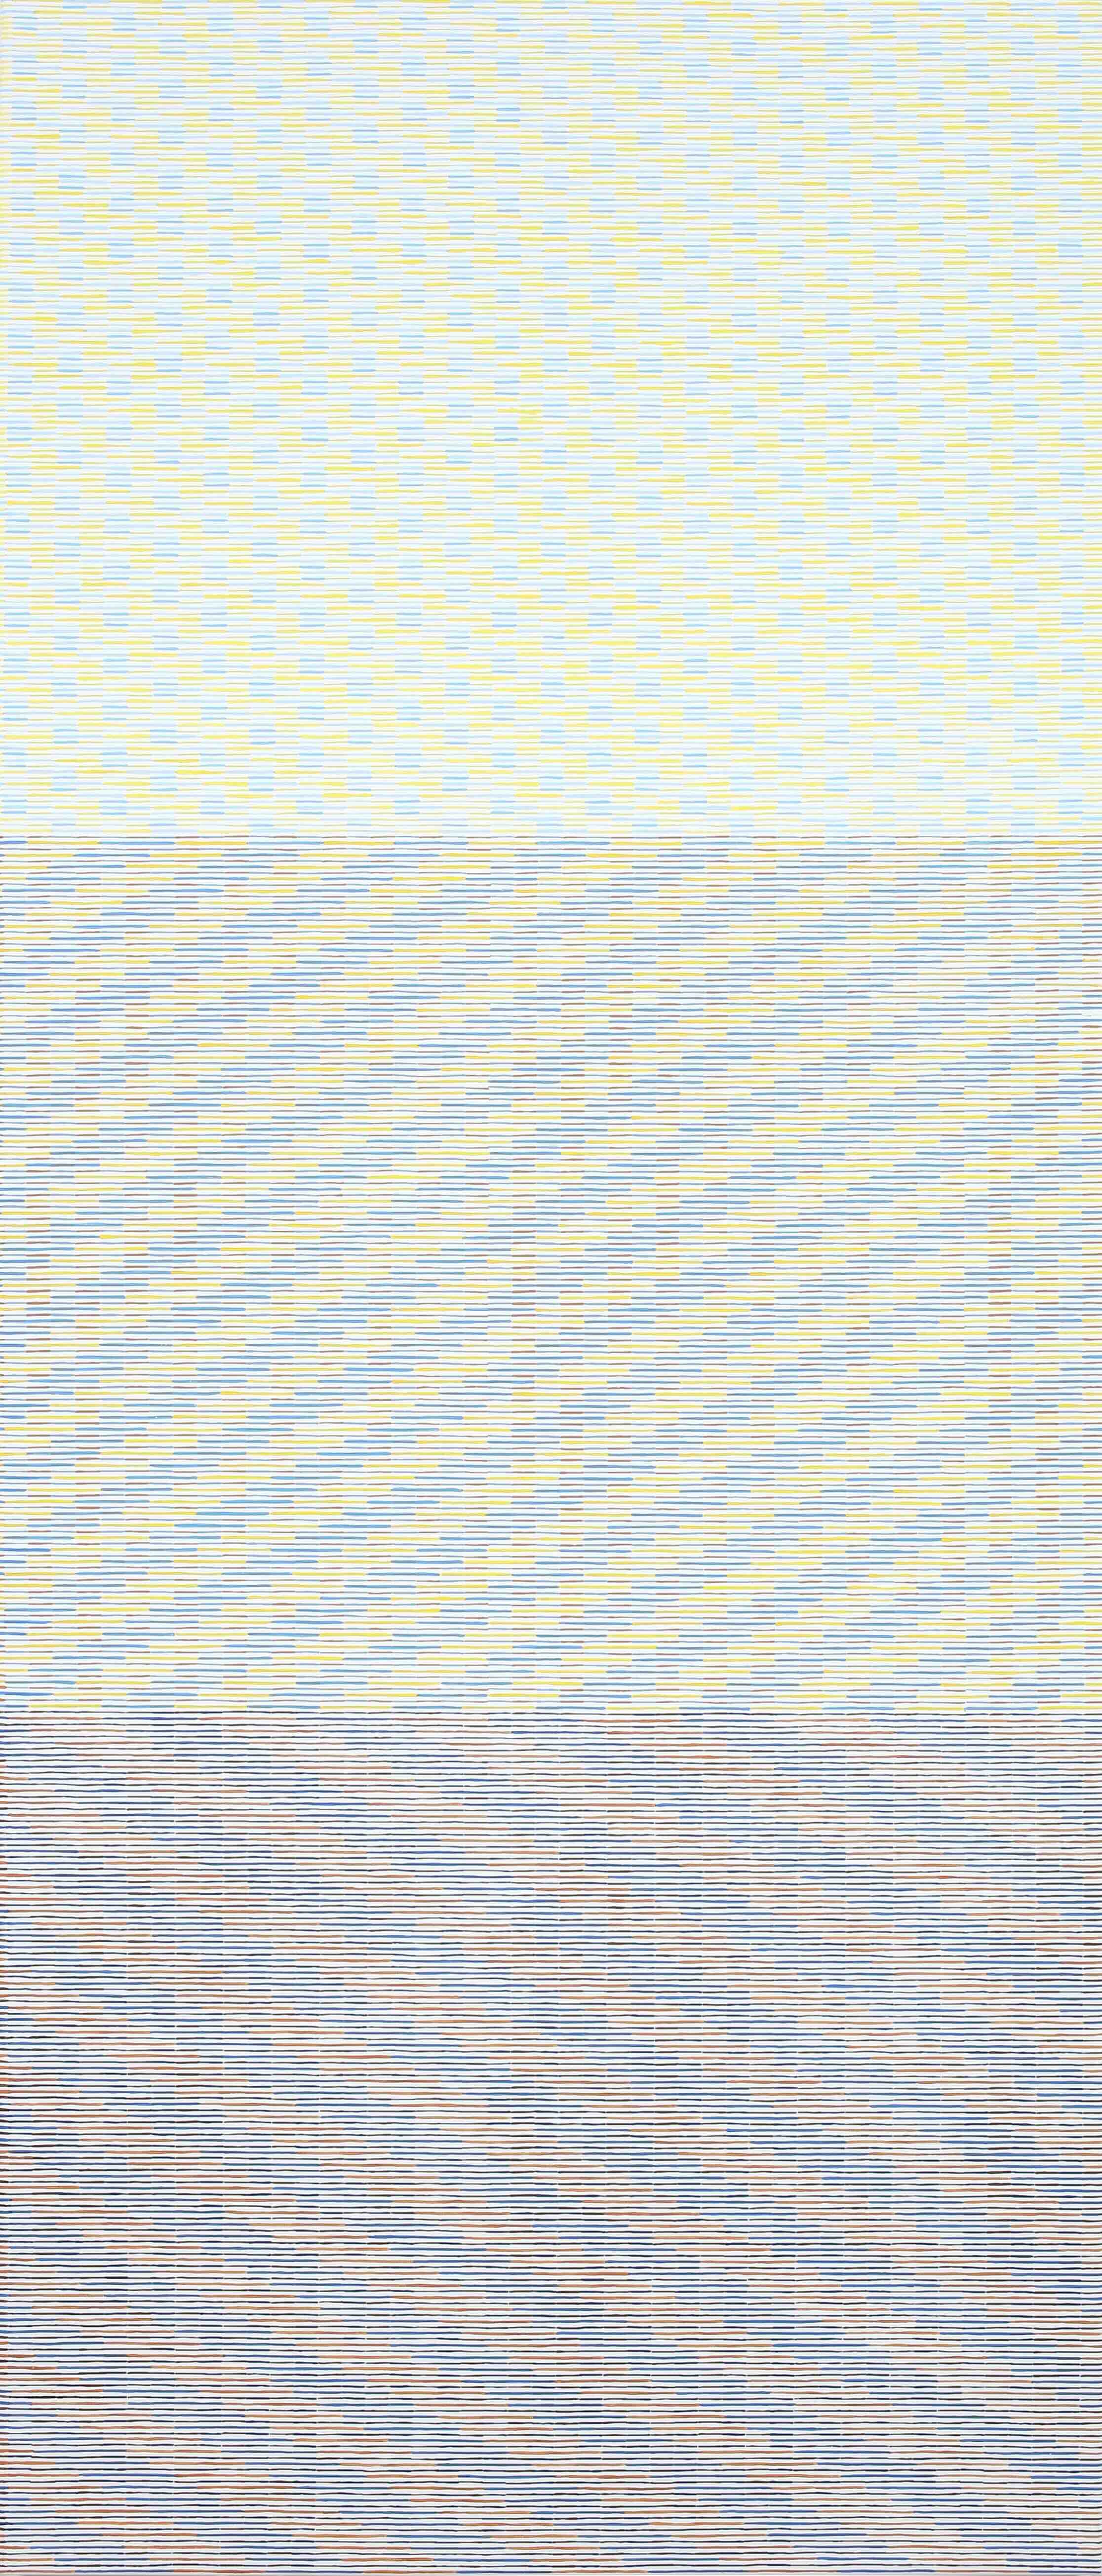 In the Line 1, Yellow/Blue, Acrylic on Canvas, 140 x 58cm